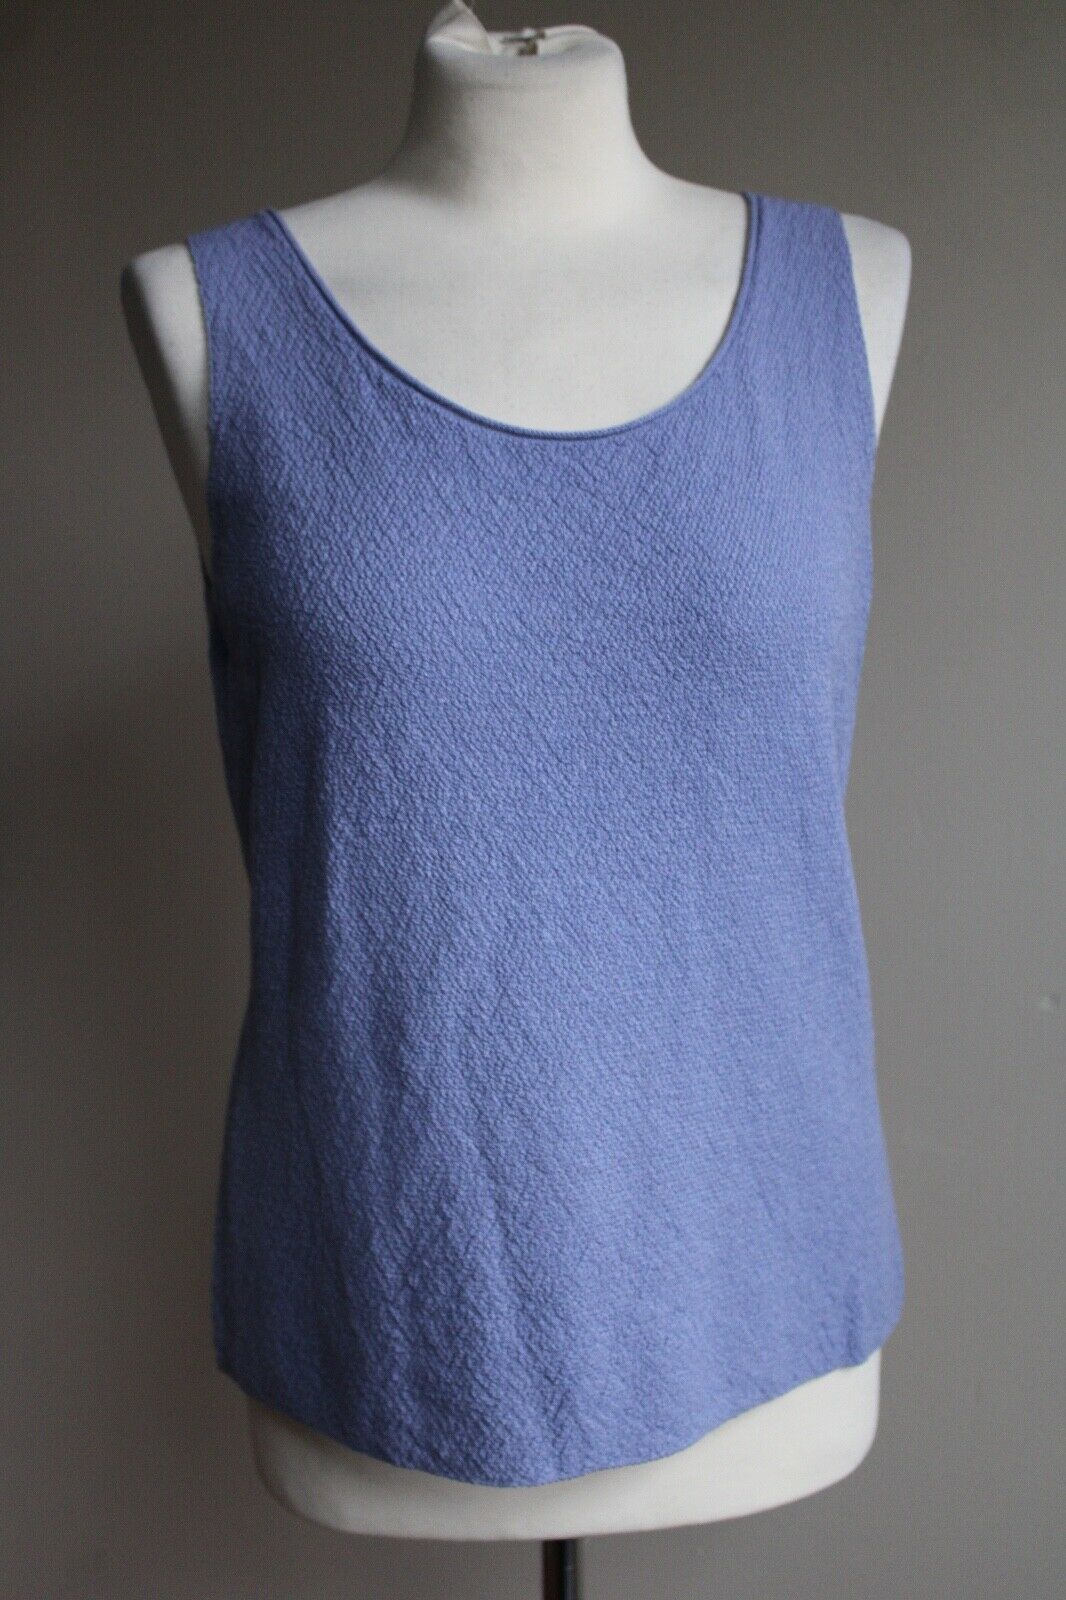 Primary image for Eileen Fisher M Lavender Purple 100% Wool Textured Sleeveless Shell Tank Sweater